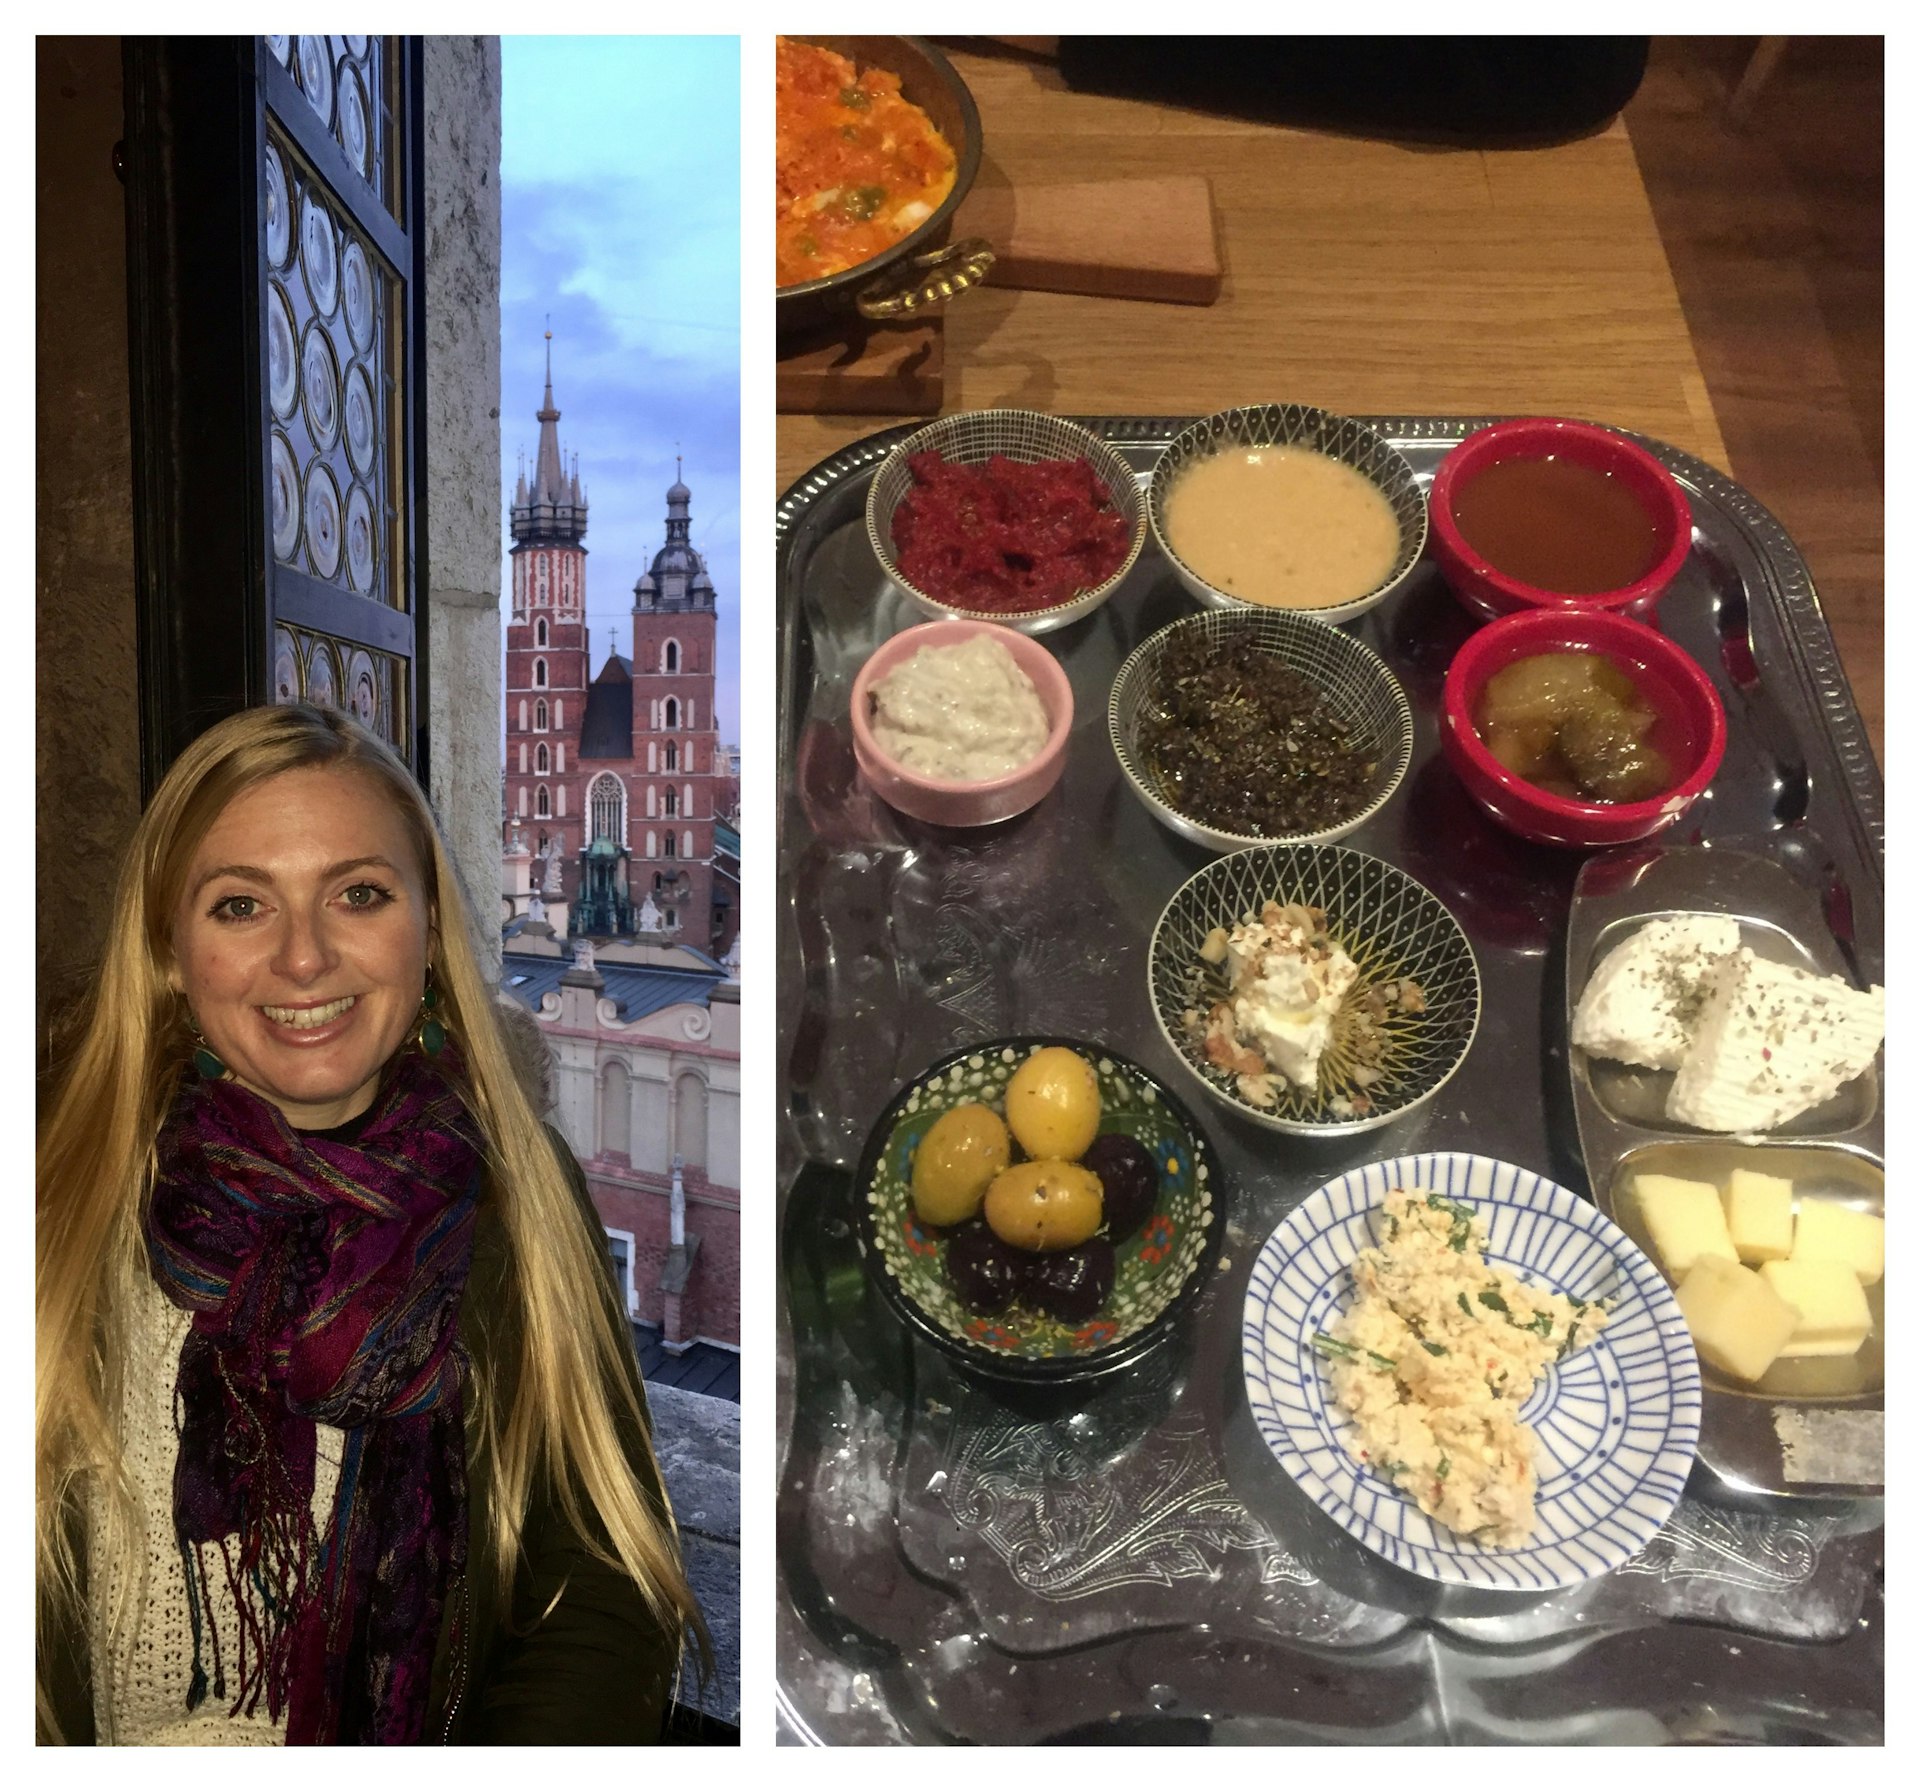 The author in the tower with the square behind her (left) and a breakfast of olives, hummus, beetroot and cheese on the right